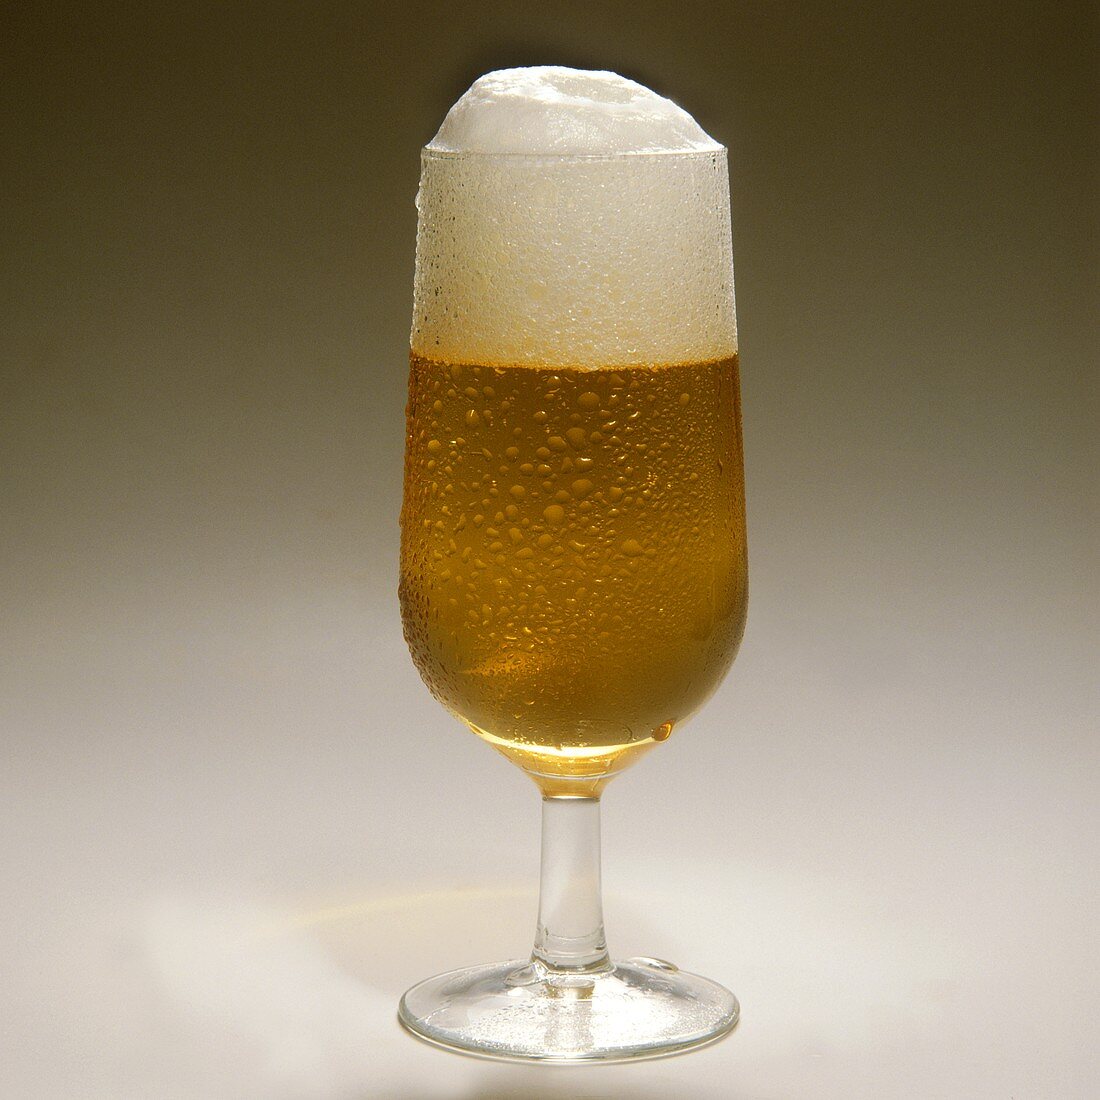 A glass of beer